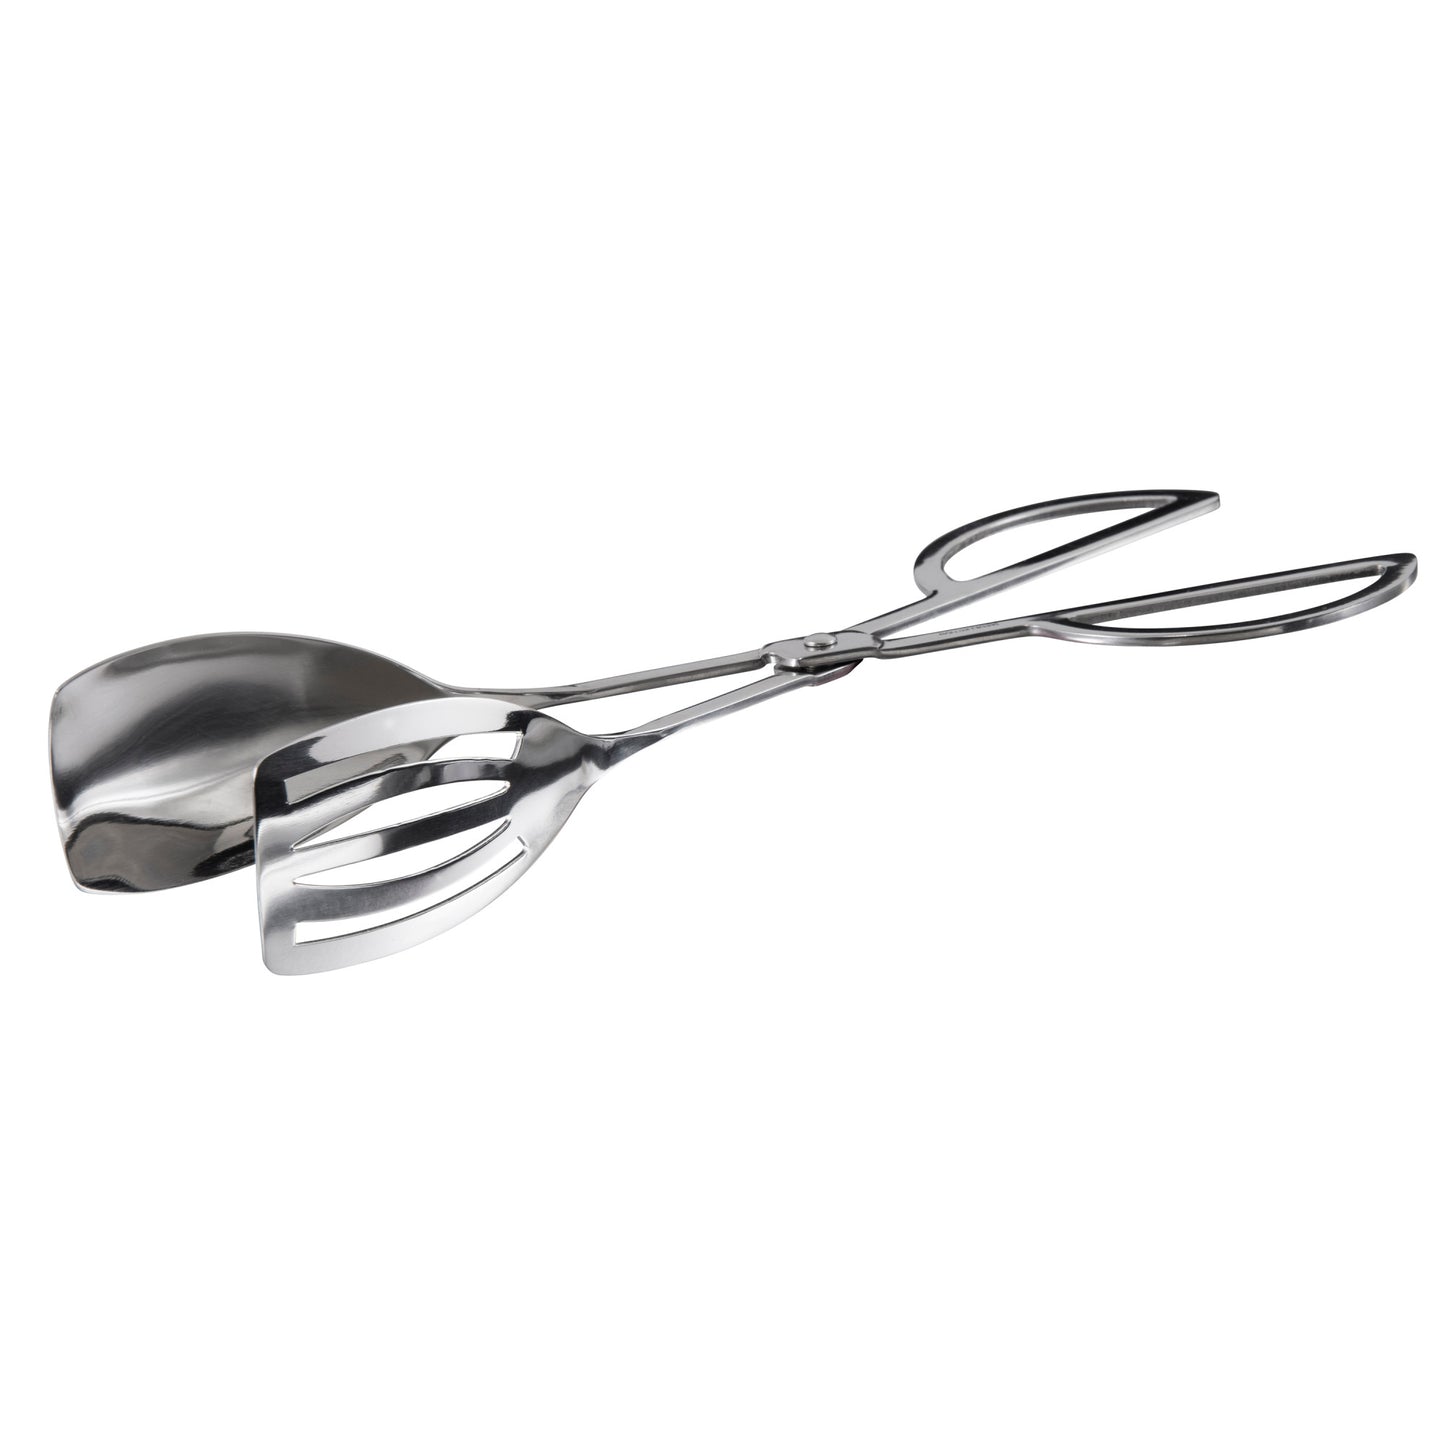 ST-10S - 10" Slotted and Solid Spatula Salad Tongs, Mirror Finish Stainless Steel